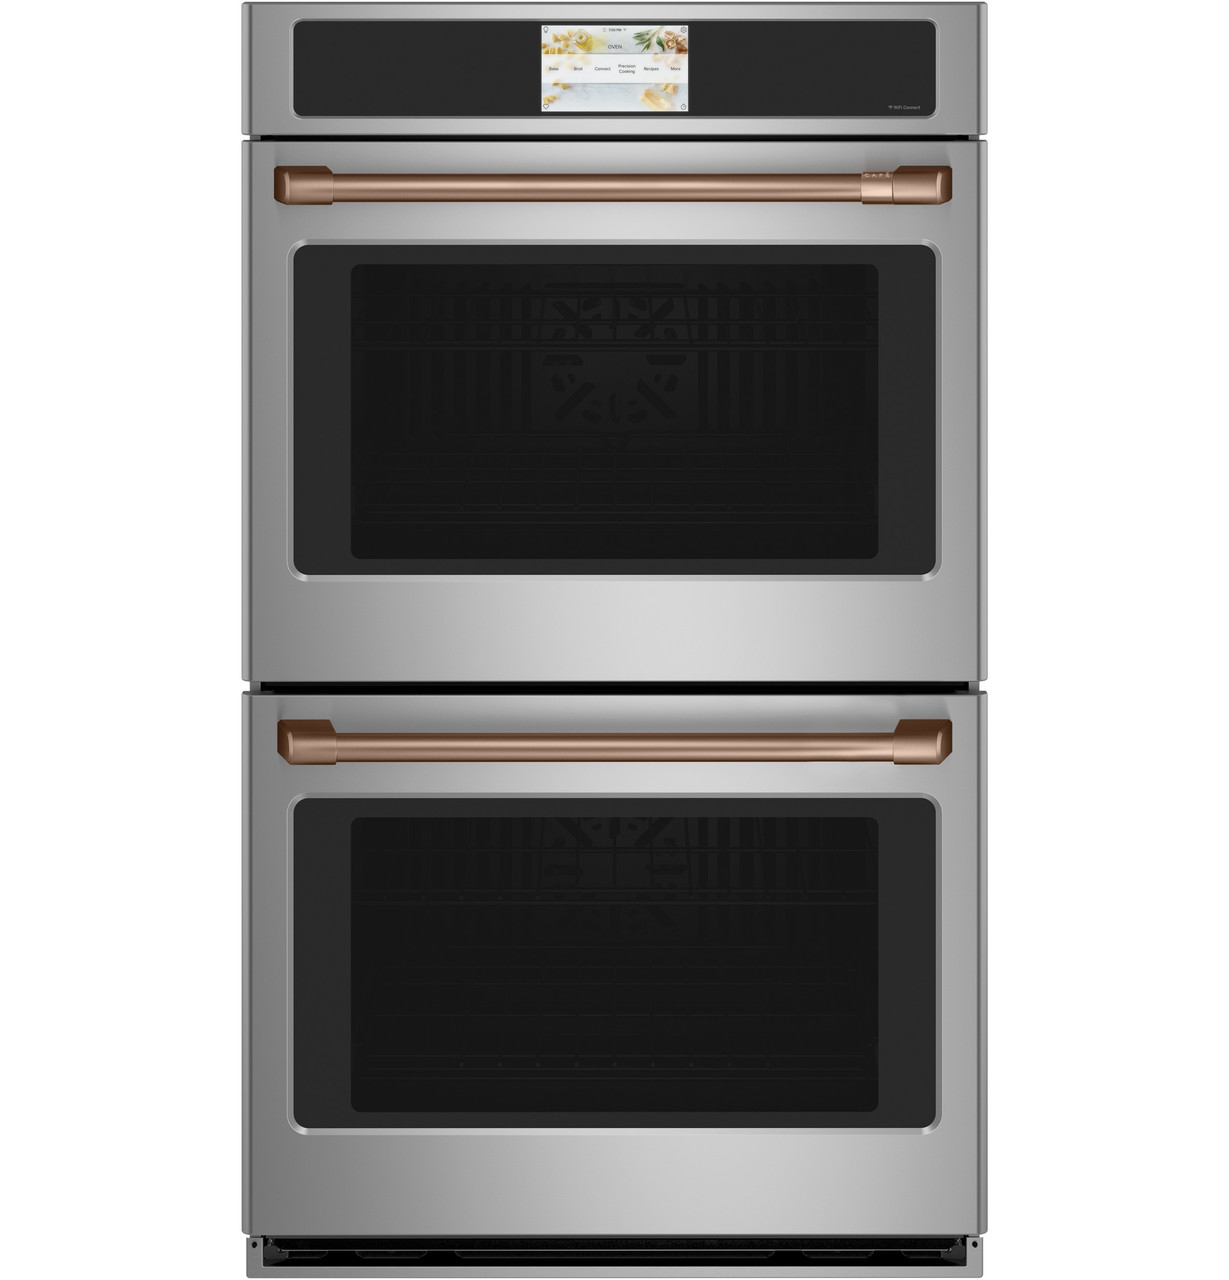 How to Choose the Best Wall Oven: Wall Oven Sizes, Types & More